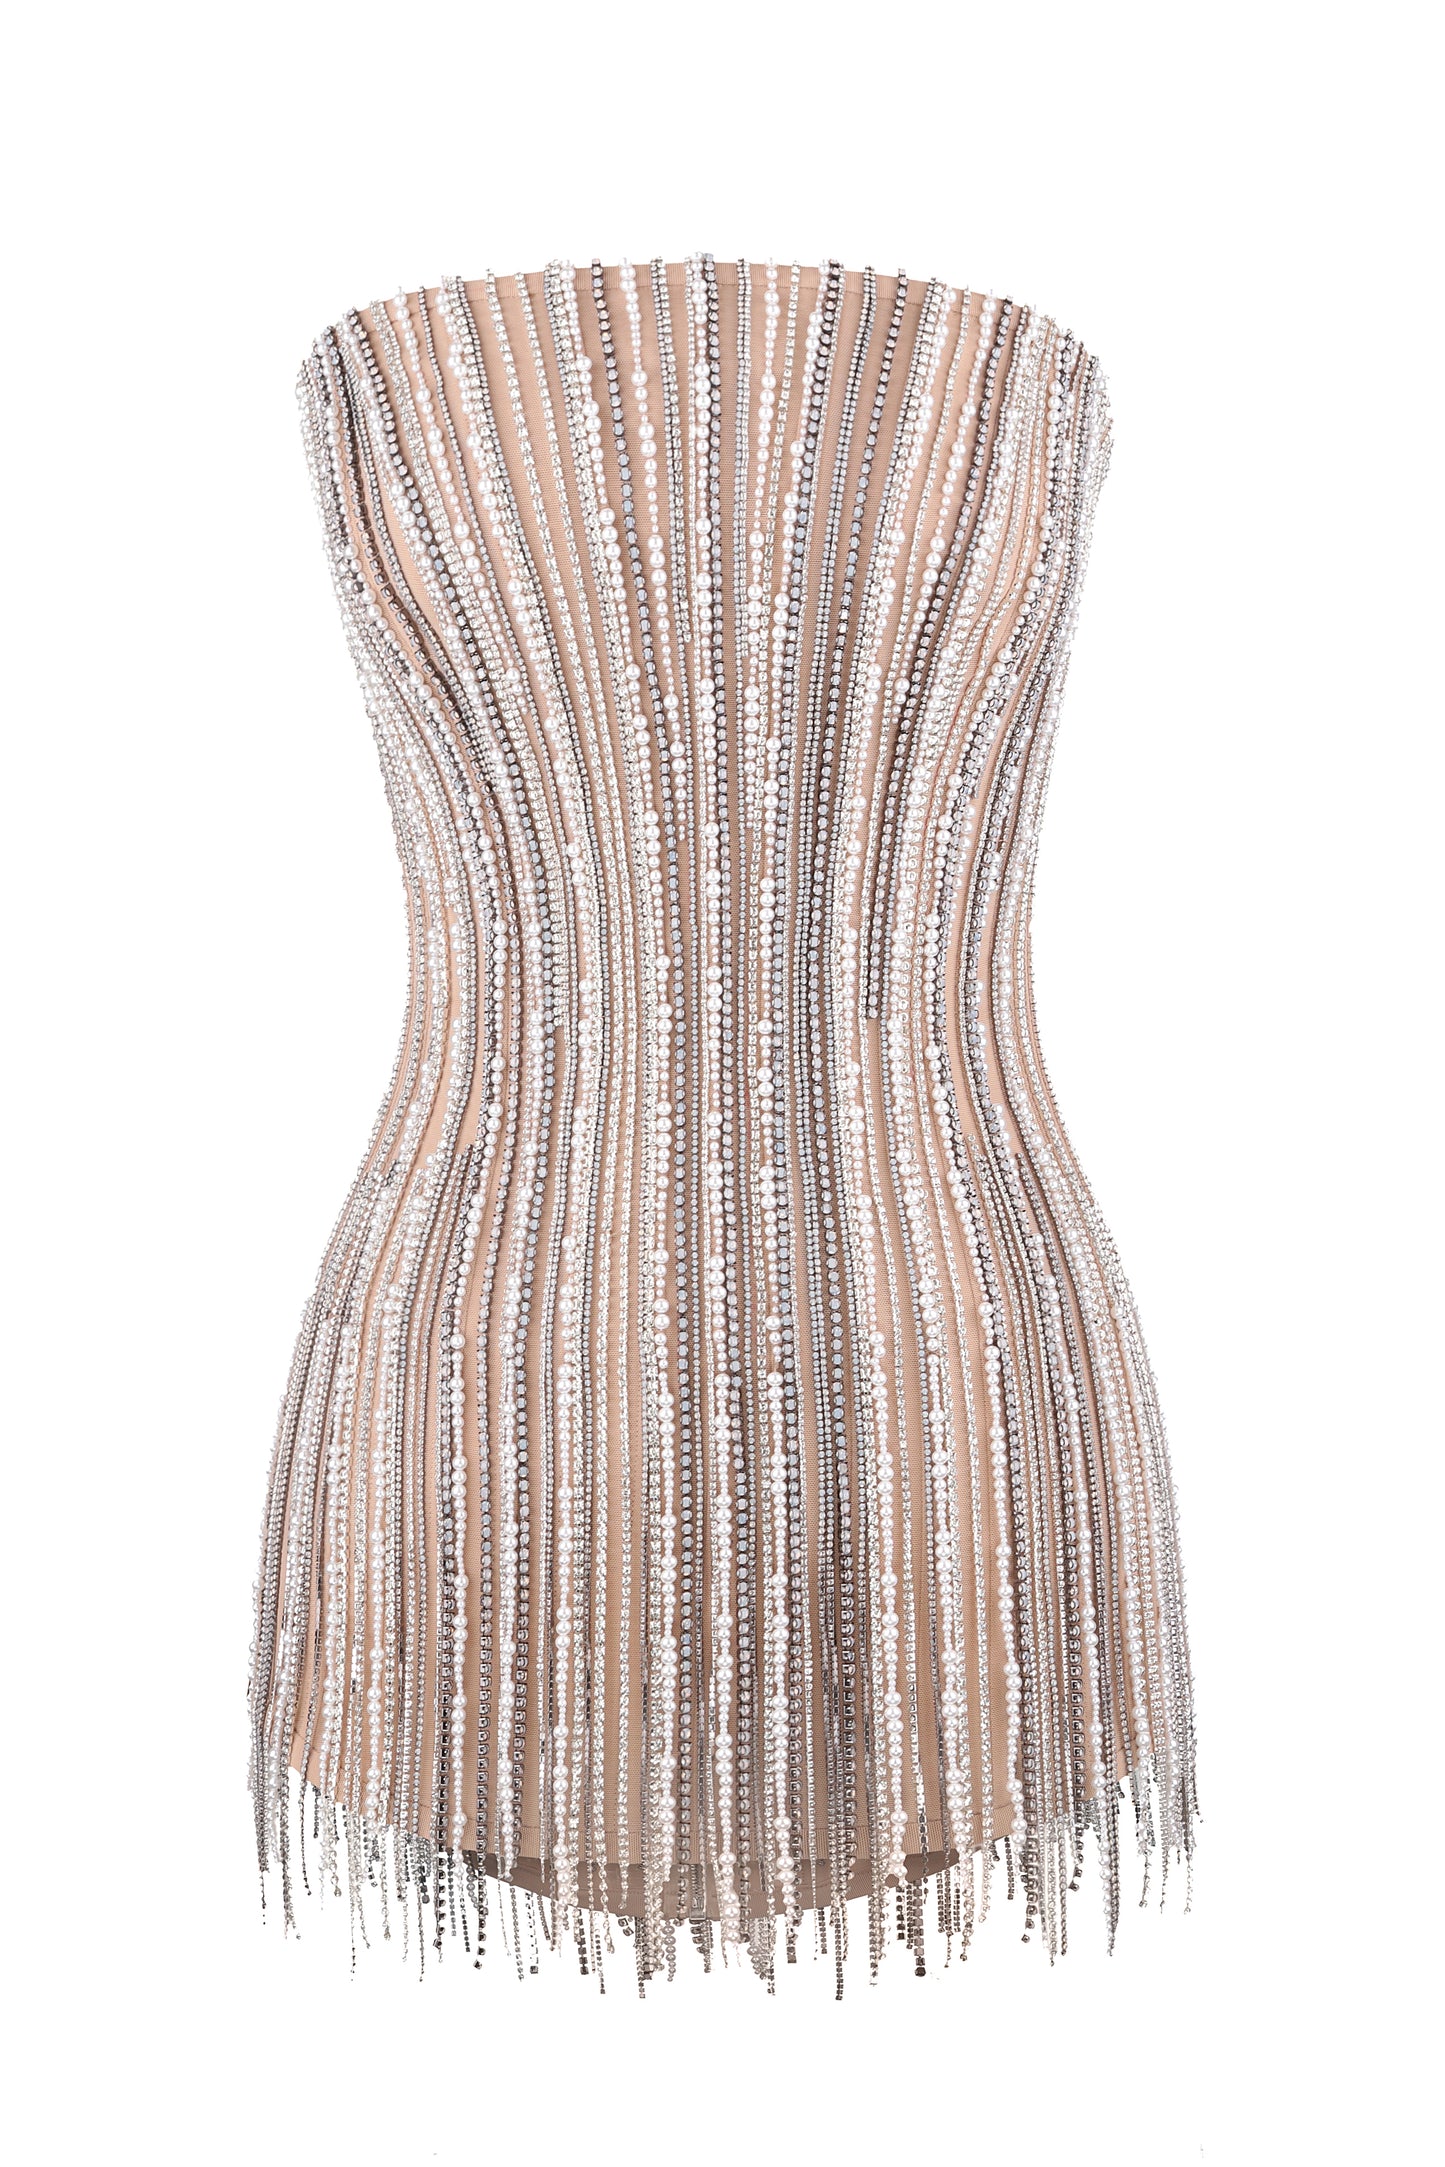 Corset dress embellished with crystals and pearls